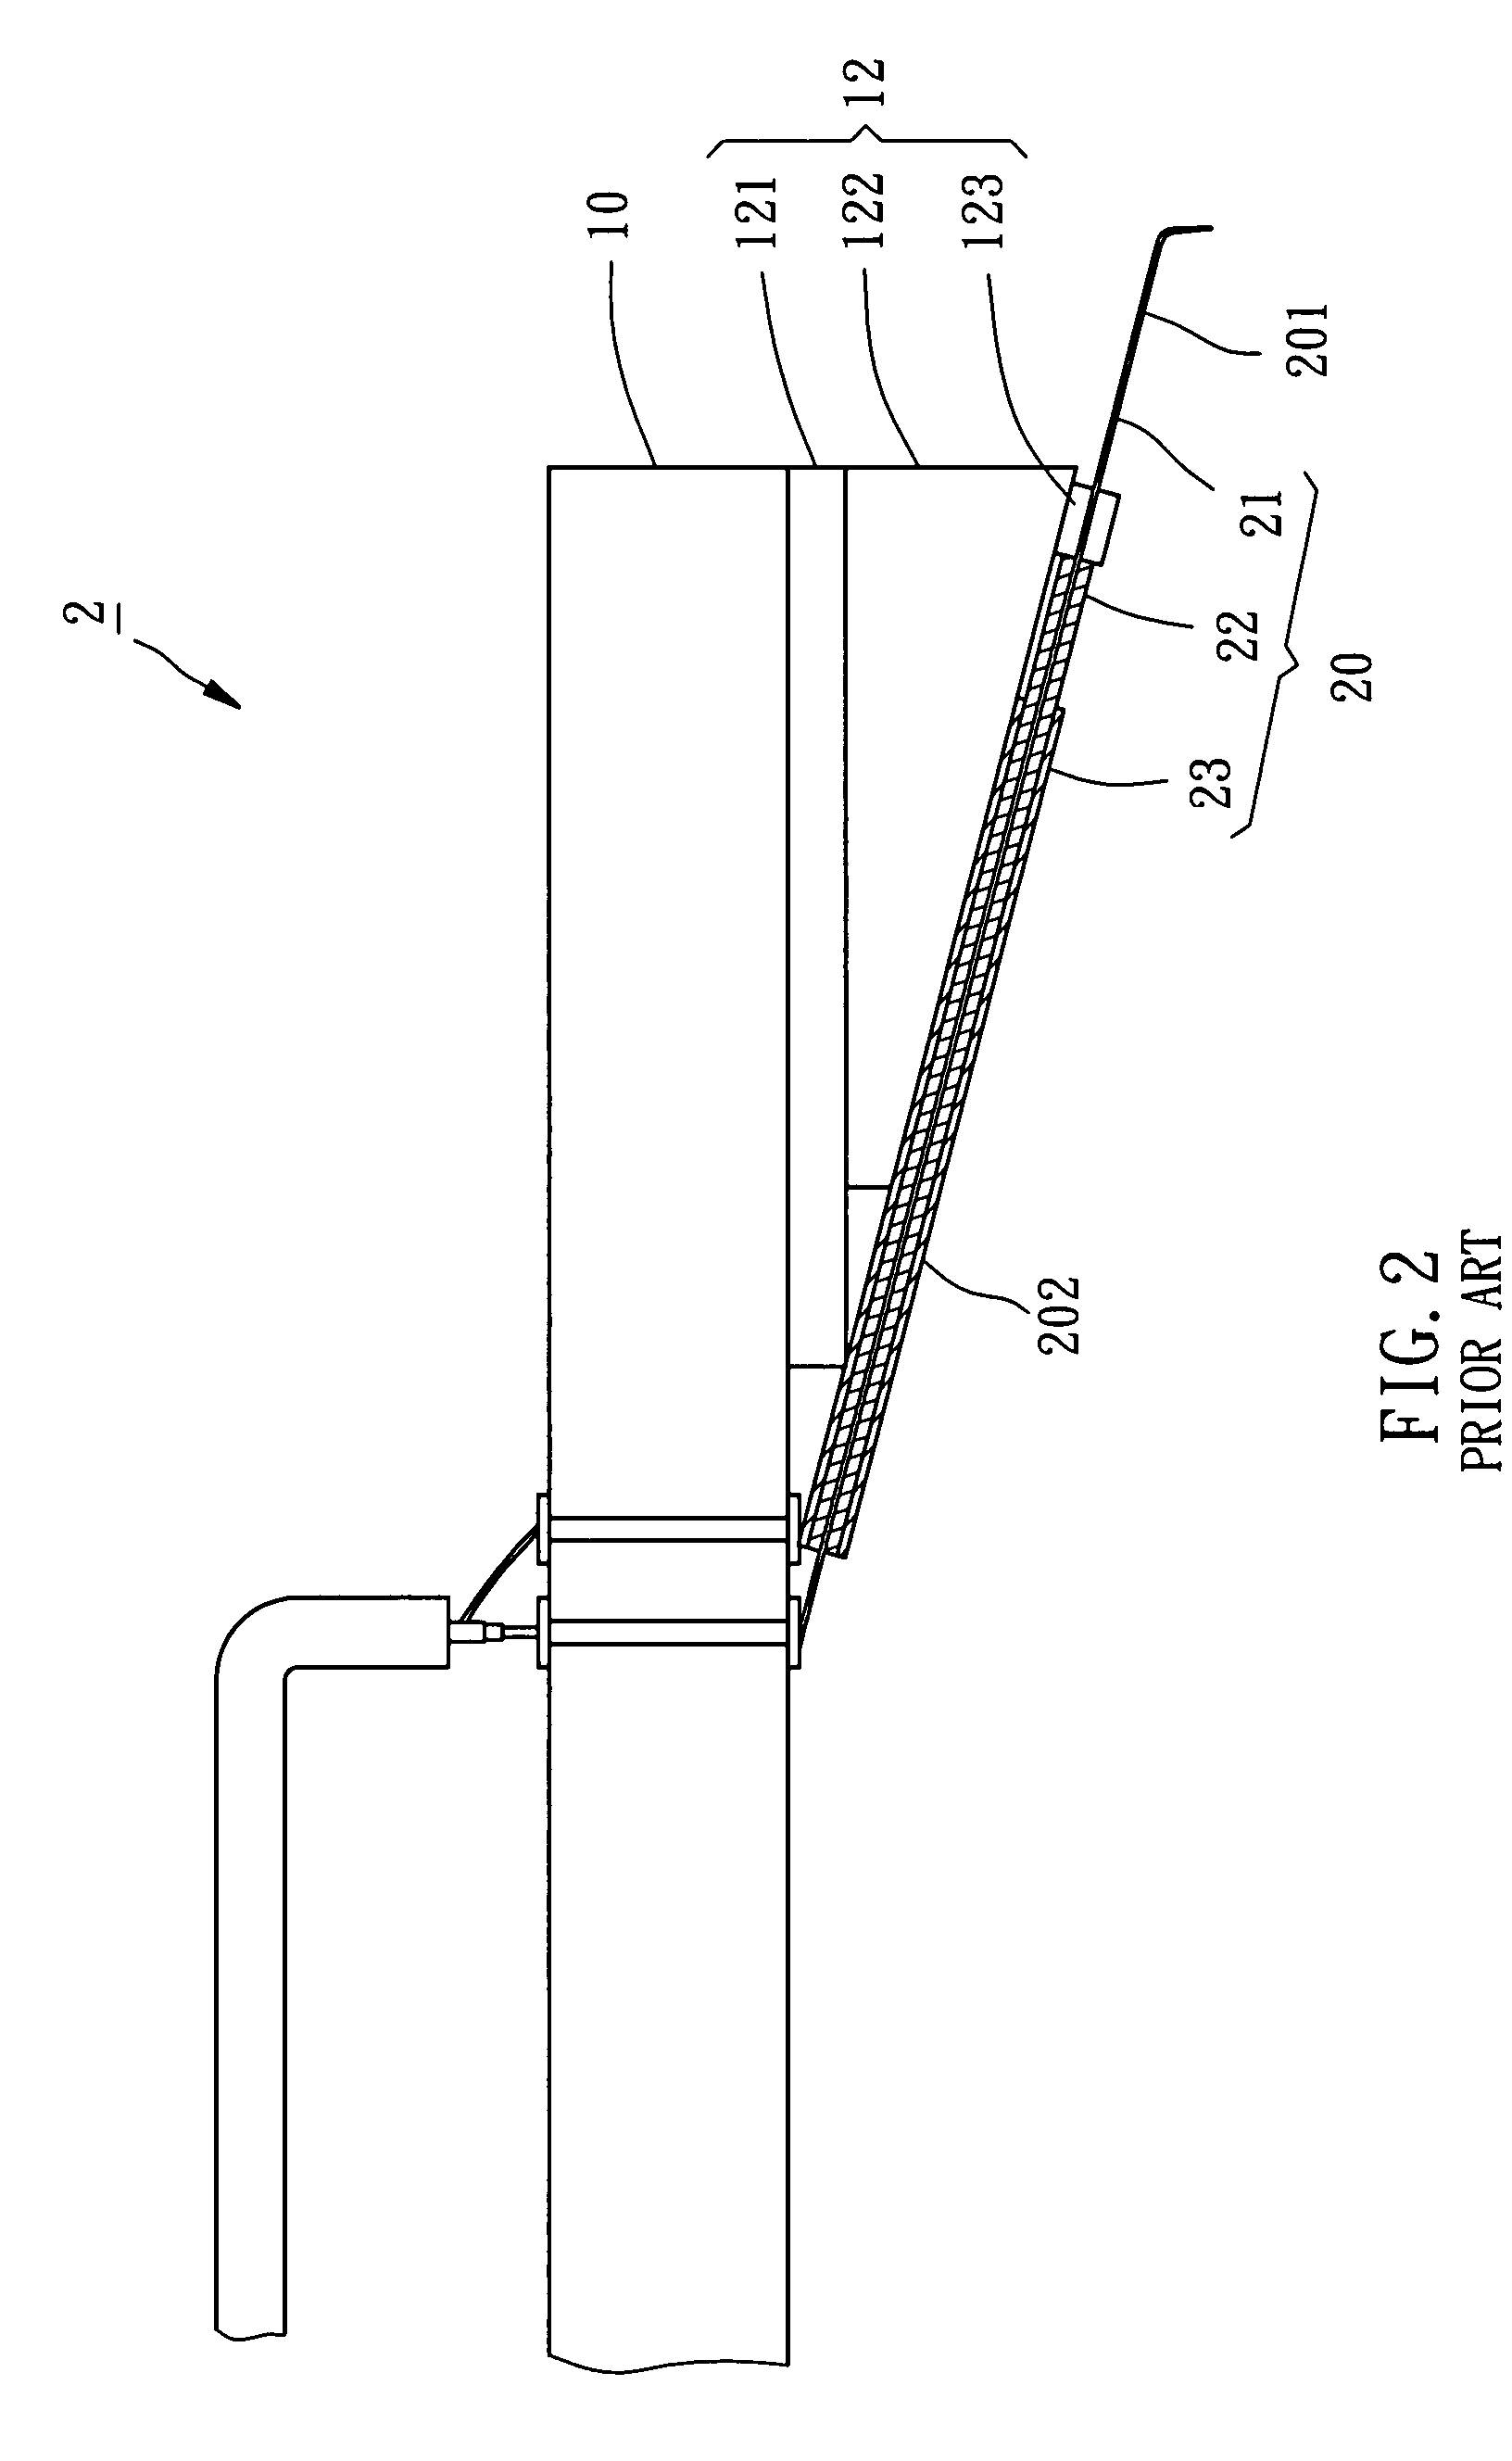 Cantilever-type probe card for high frequency application